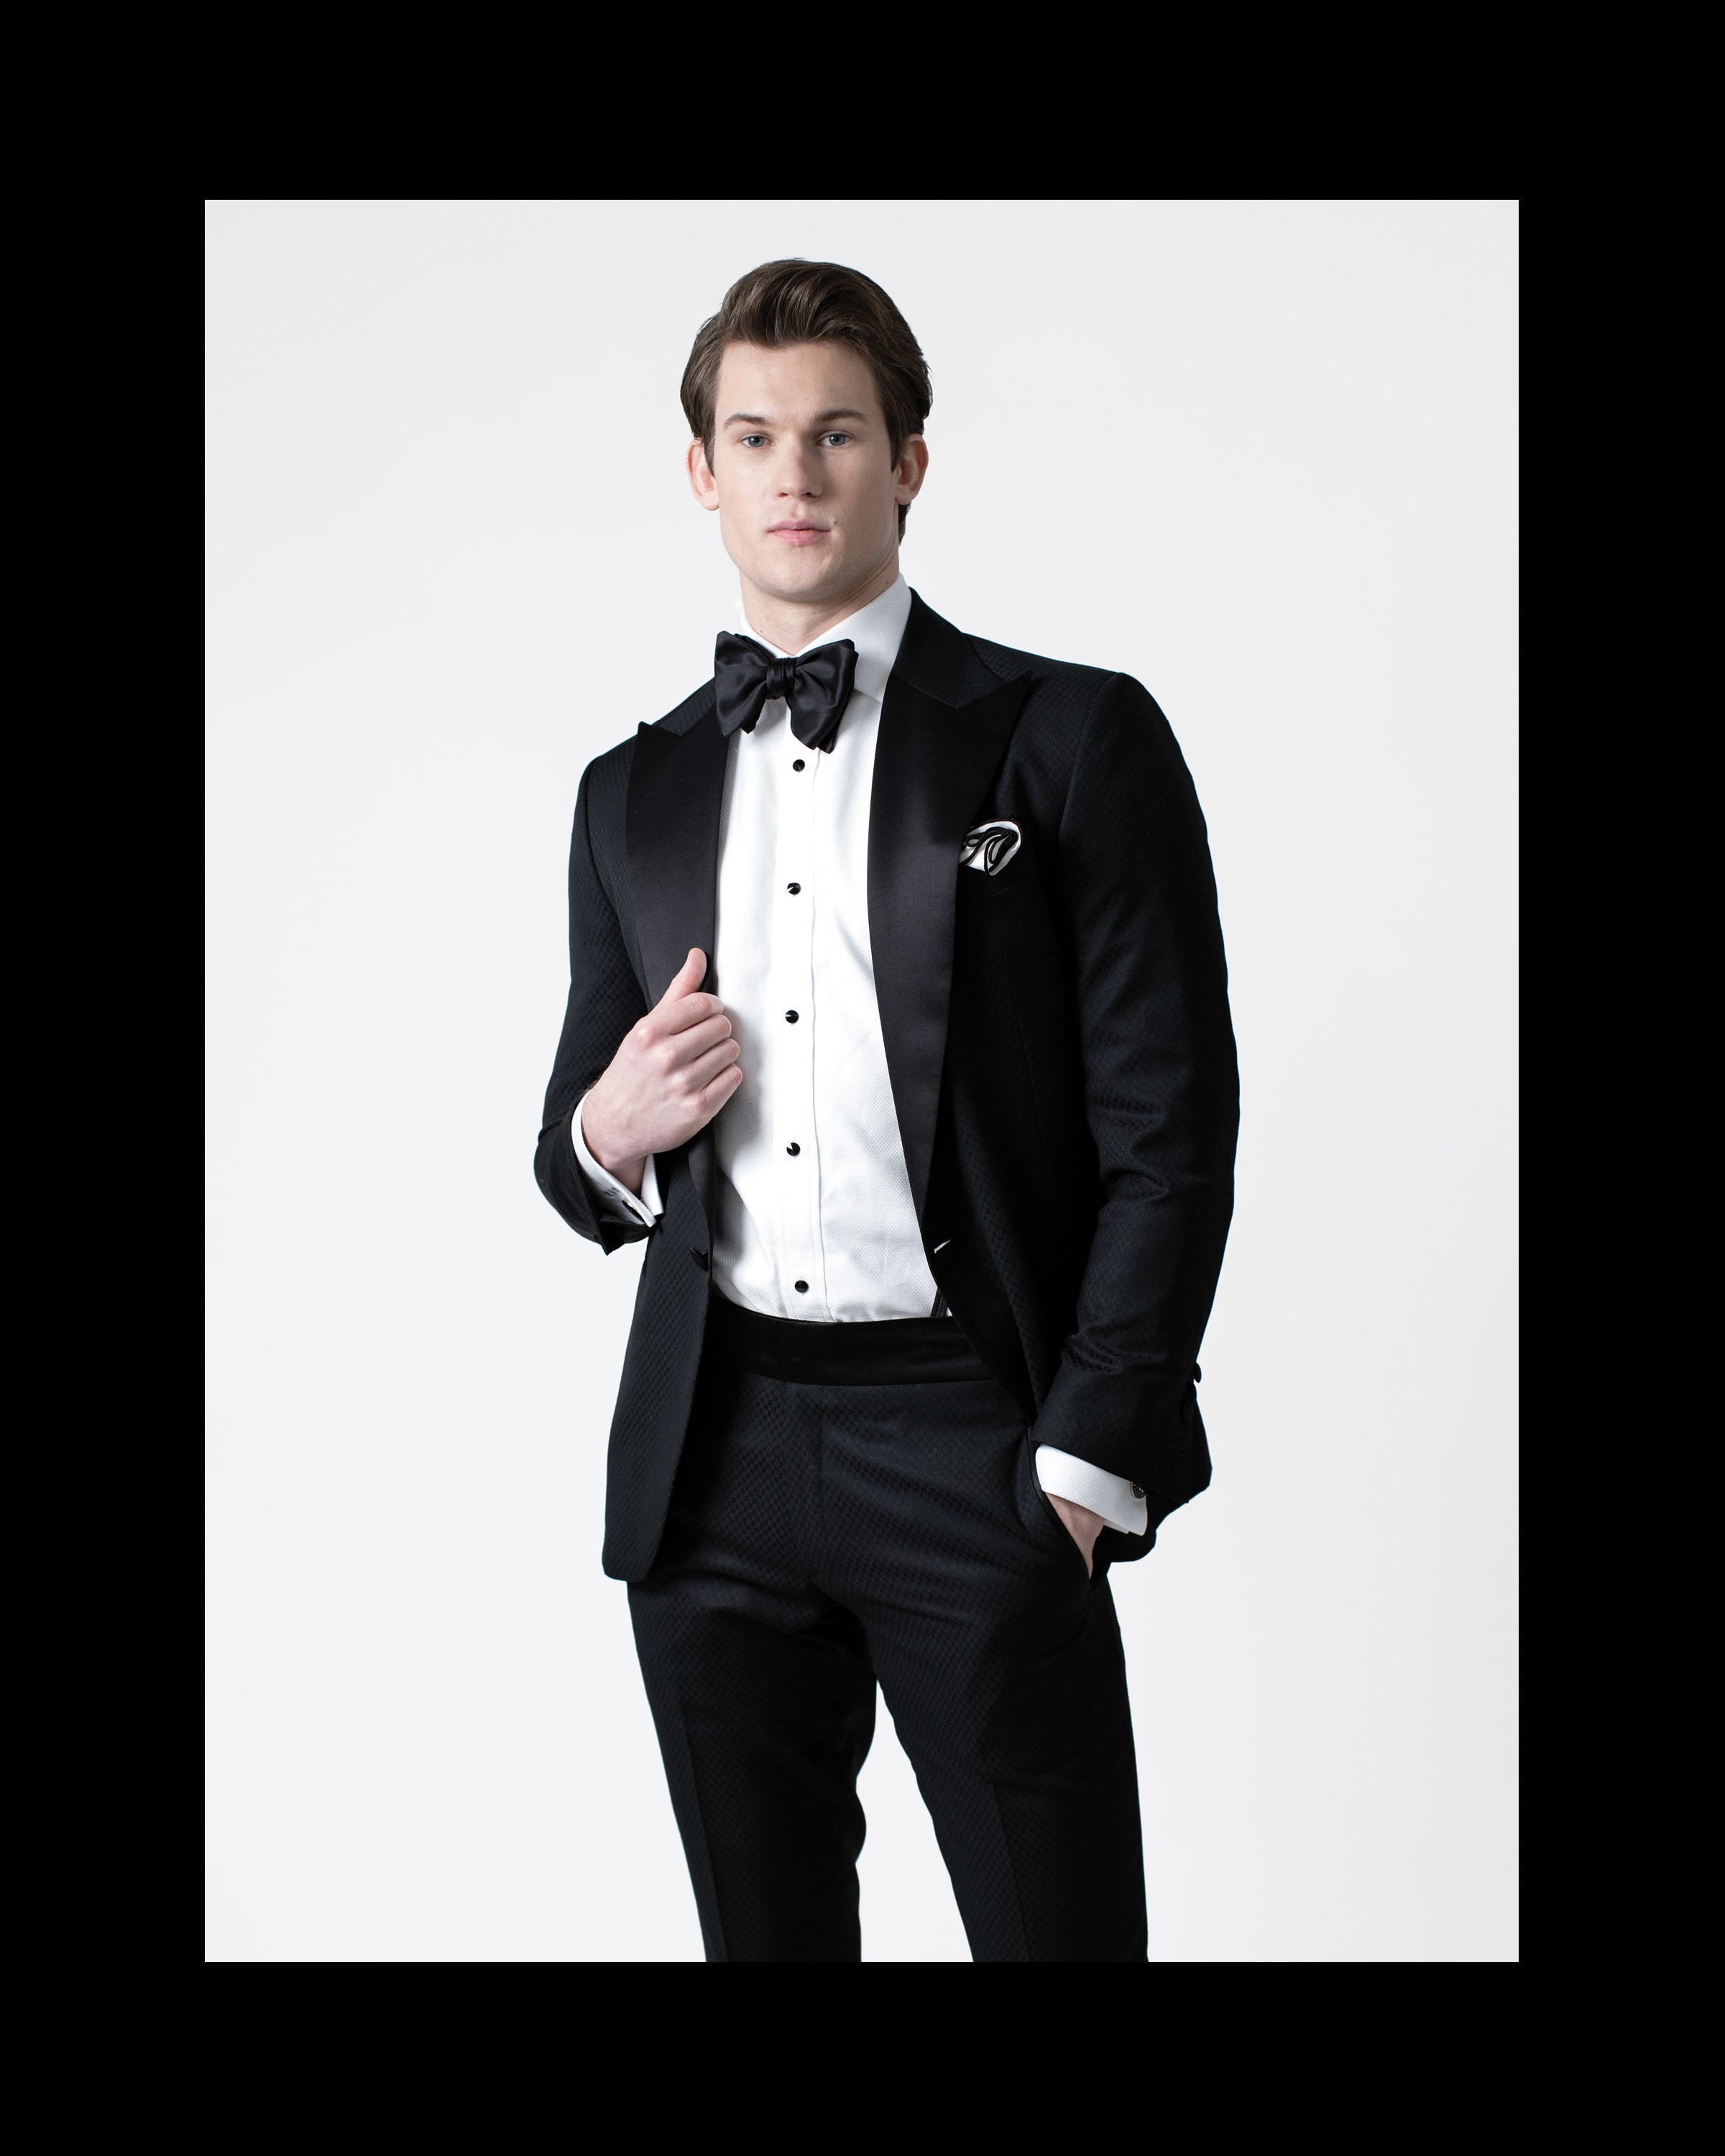 King & Bay Wedding Collection 2021 Lookbook: Timeless